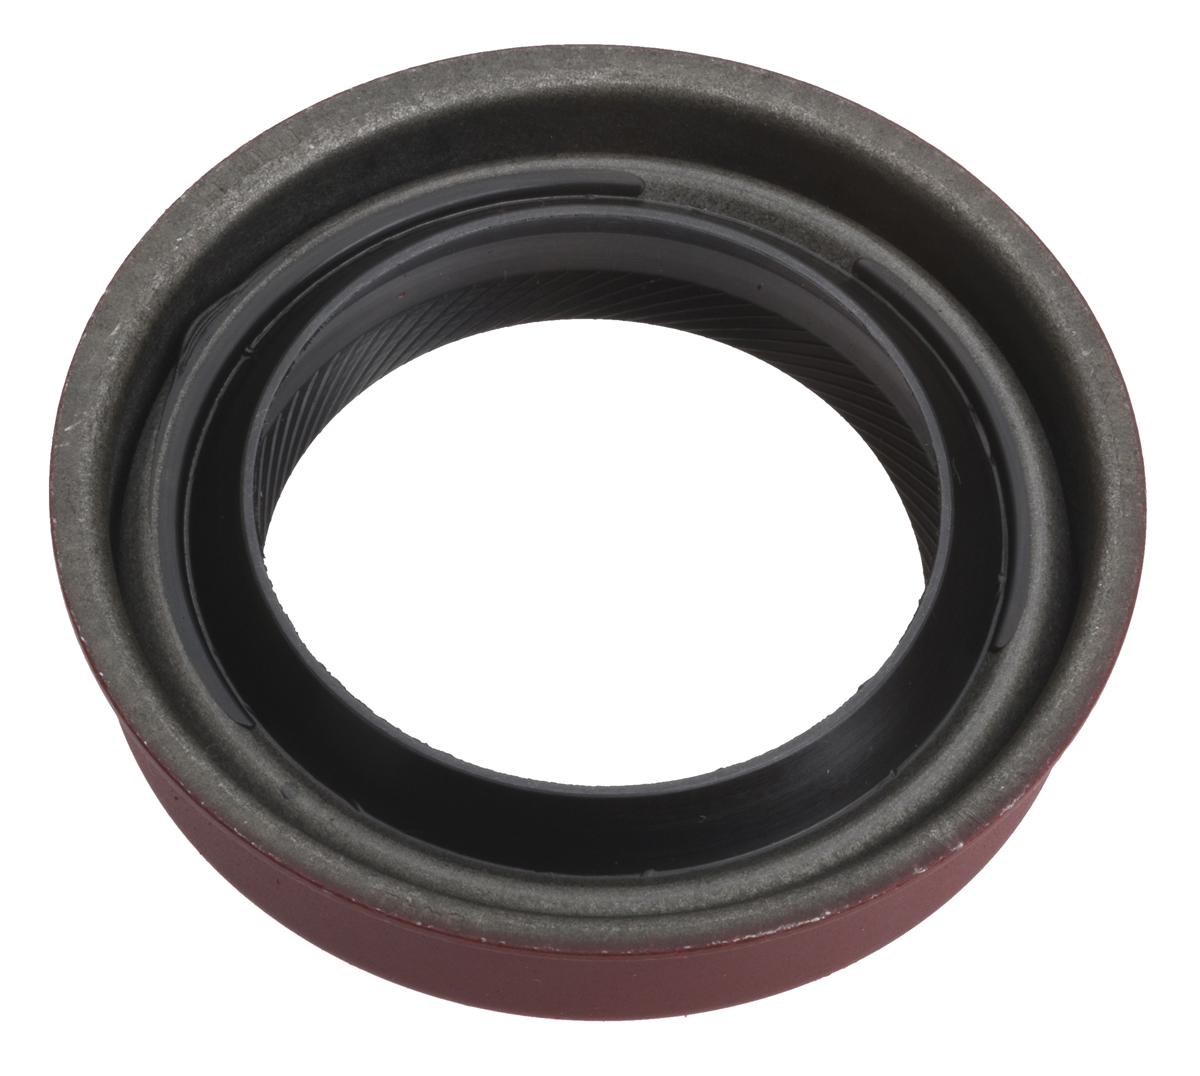 Sealed Power 9449 Tailshaft Housing Seal, 2.704 in OD, 1.887 in Shaft, 0.582 in Width, Nitrile, Various Applications, Each